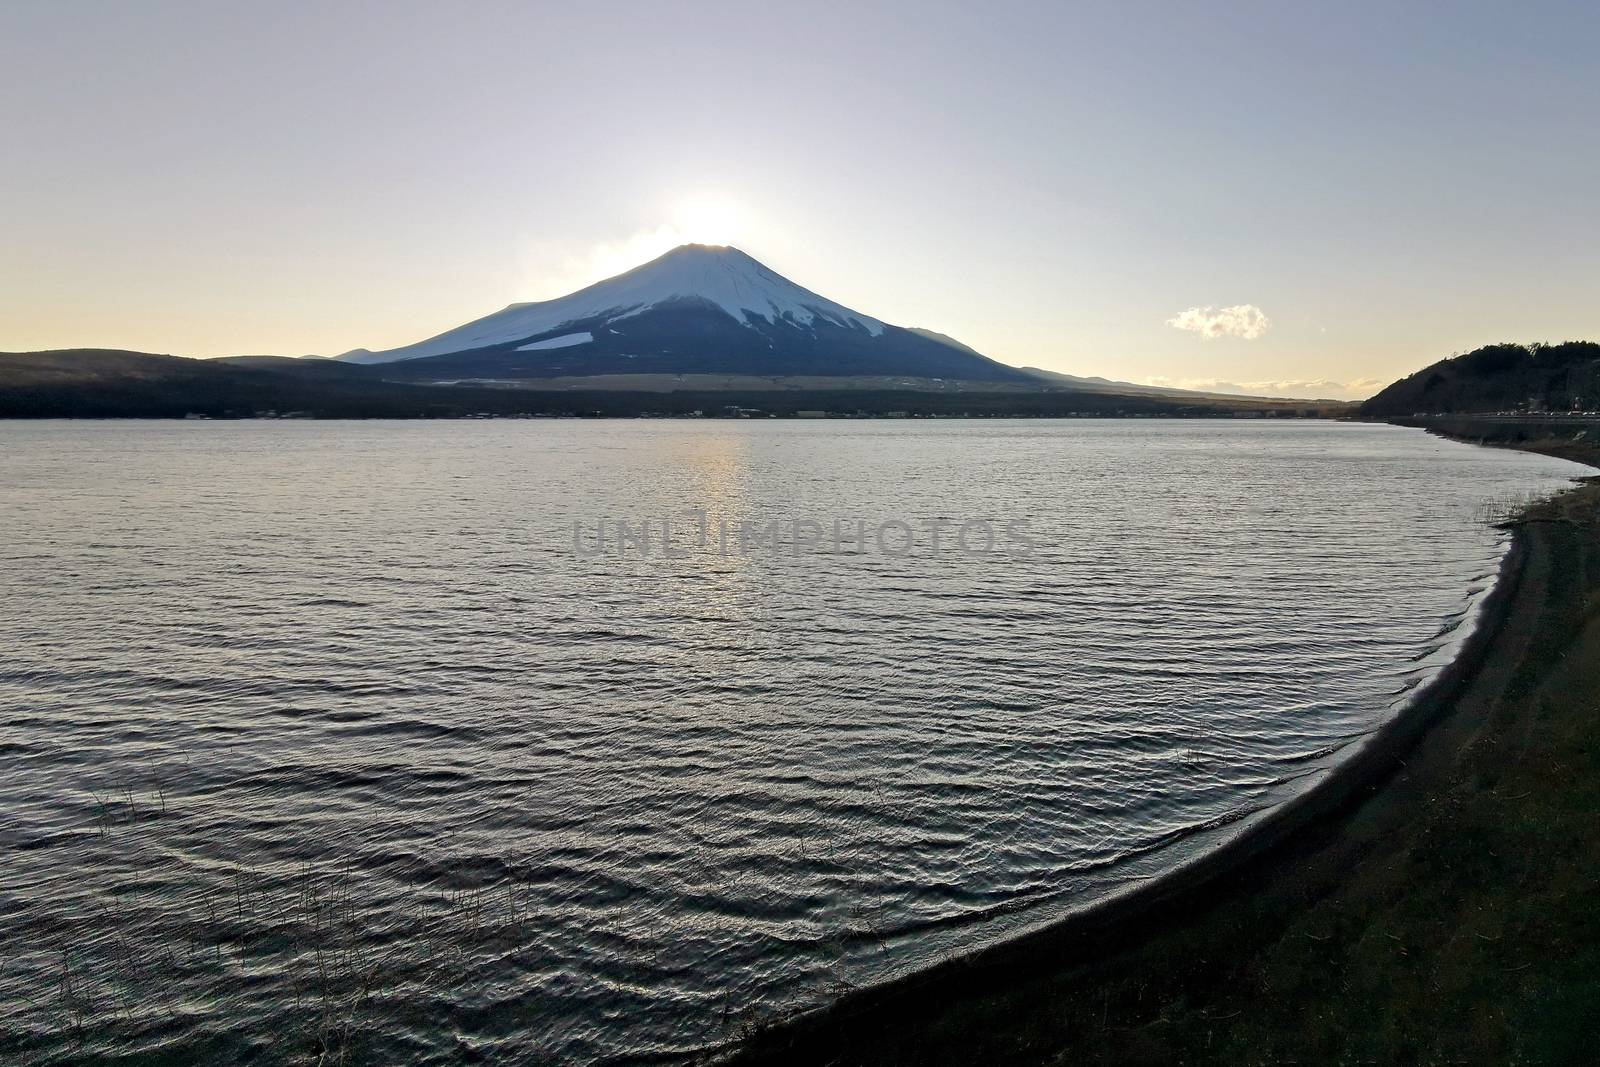 The lake, sky, Fuji mountain with snow in Japan countryside by cougarsan